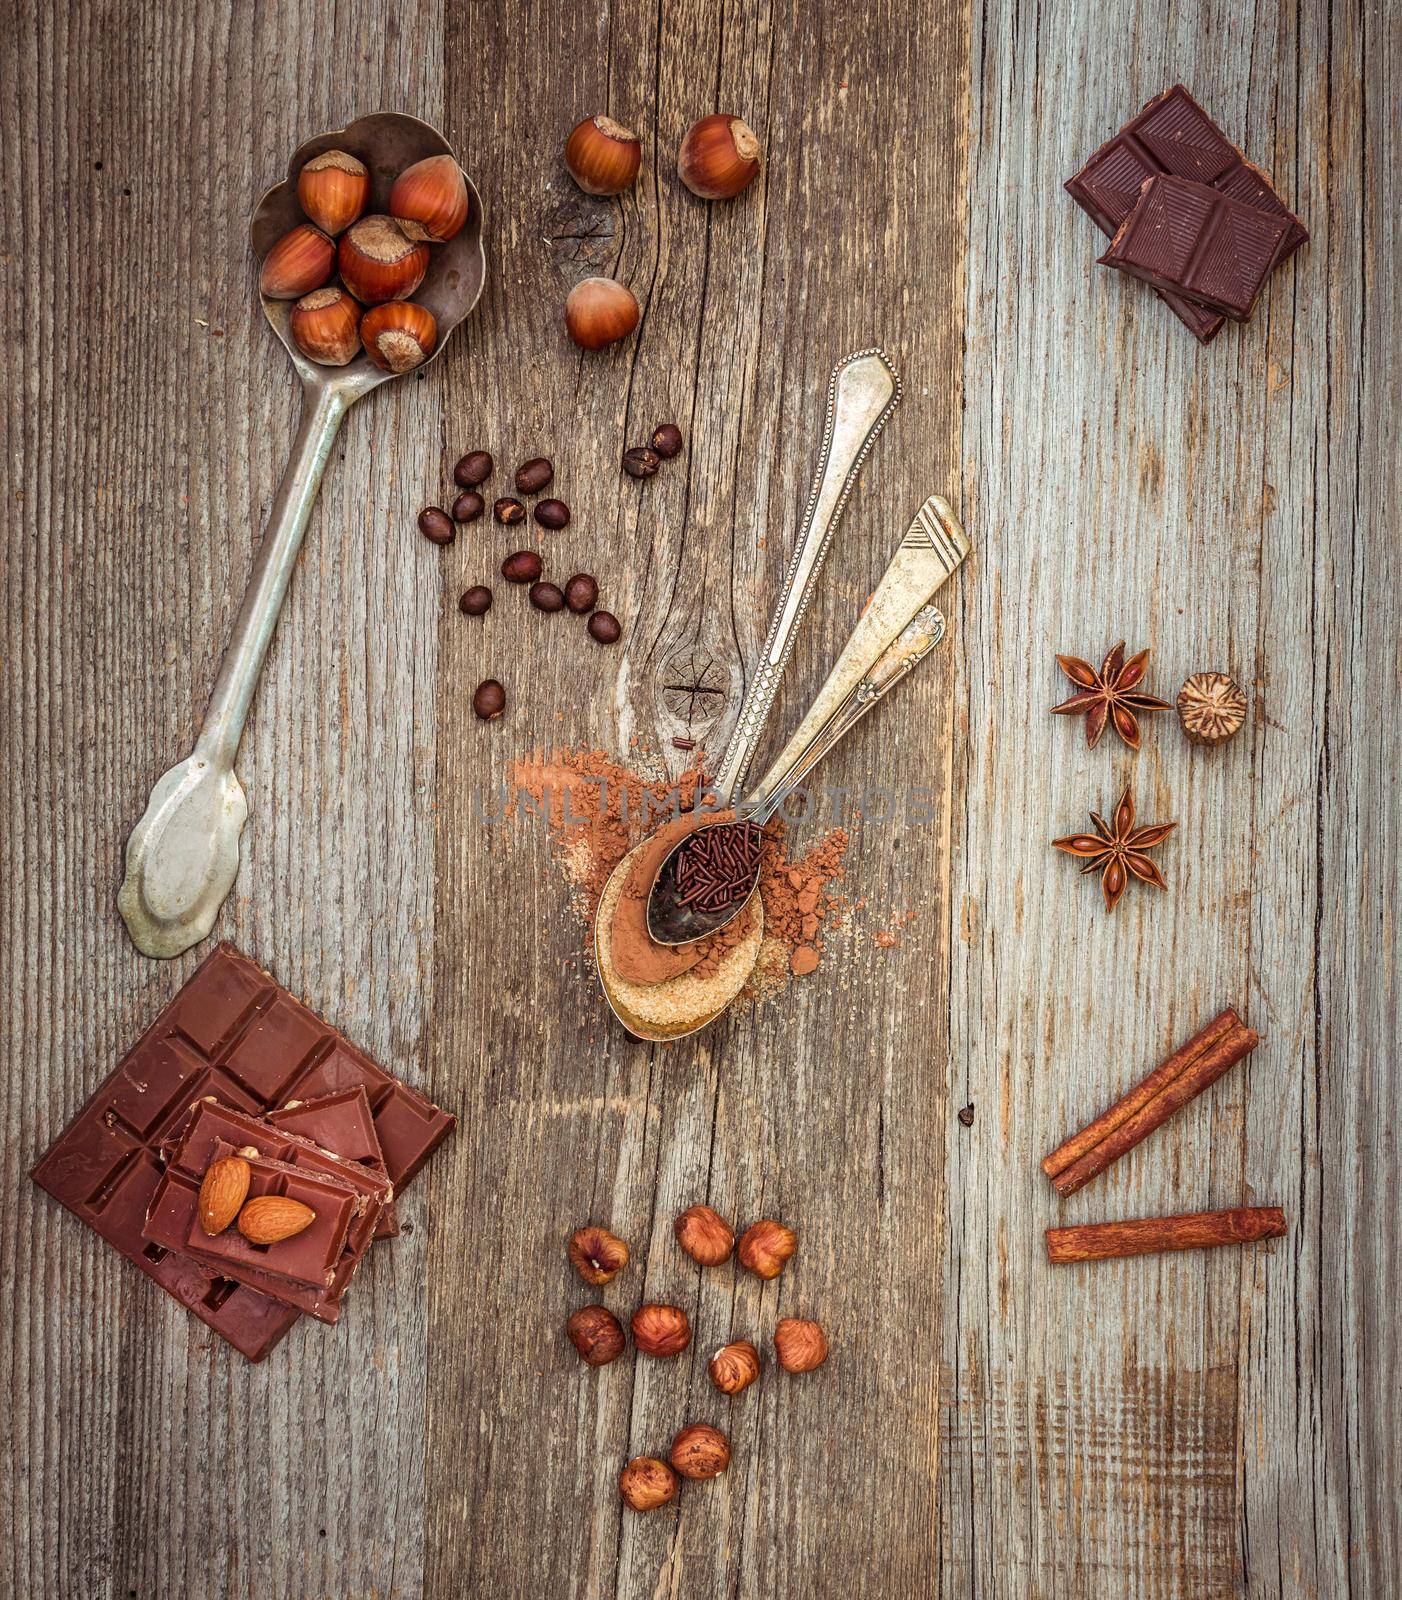 coffee beans and chocolate on a wooden background.